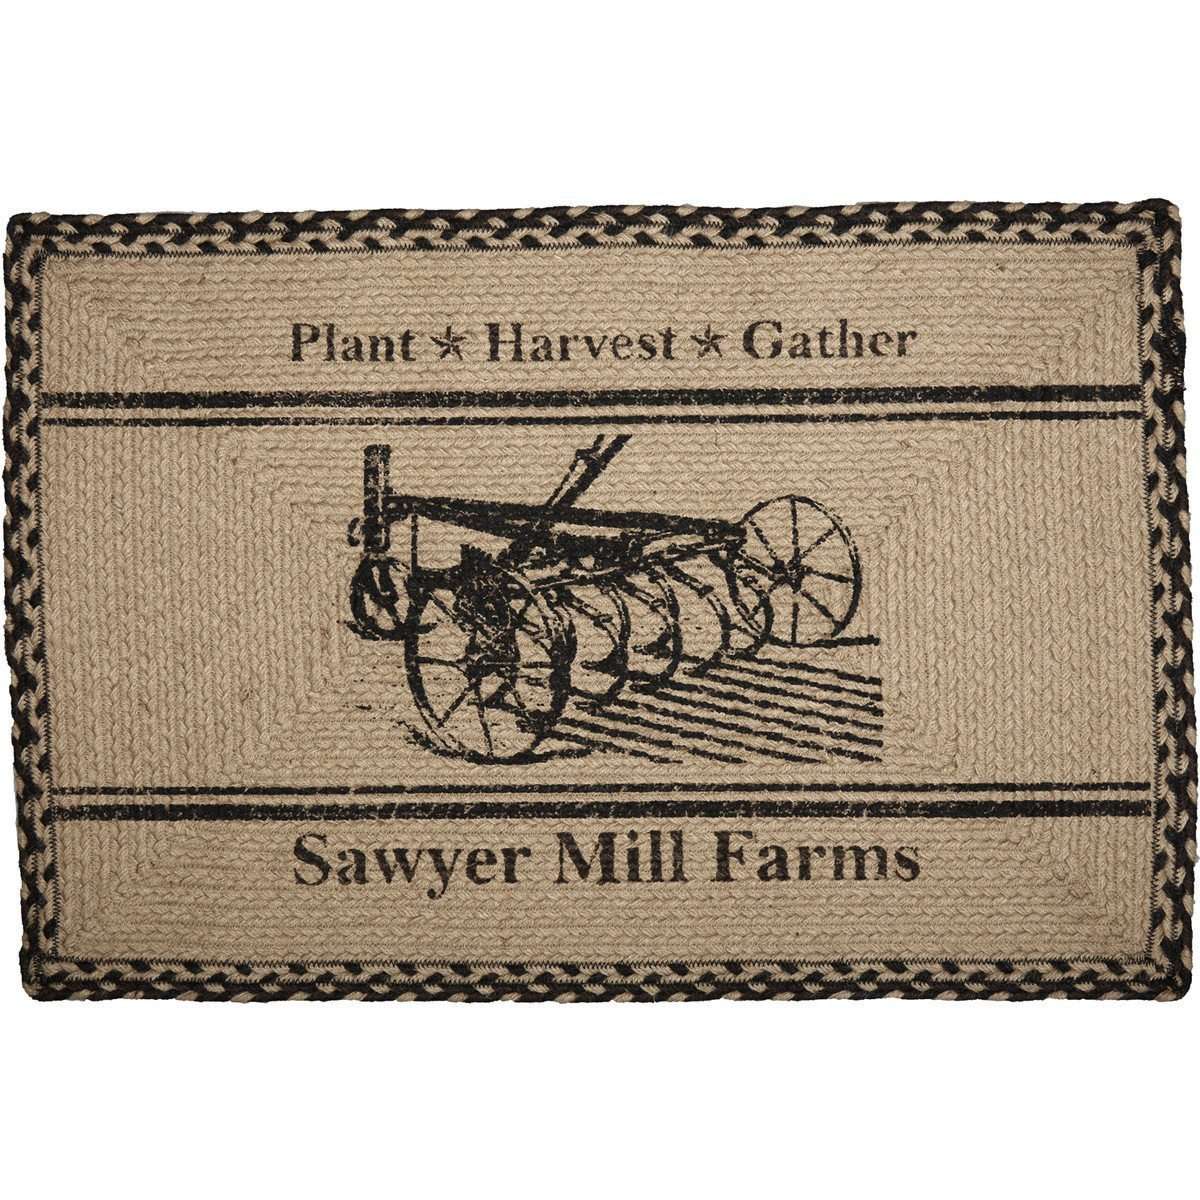 Sawyer Mill Charcoal Plow Braided Jute Rug Oval/Rect VHC Brands rugs VHC Brands 20x30 inch Rect 